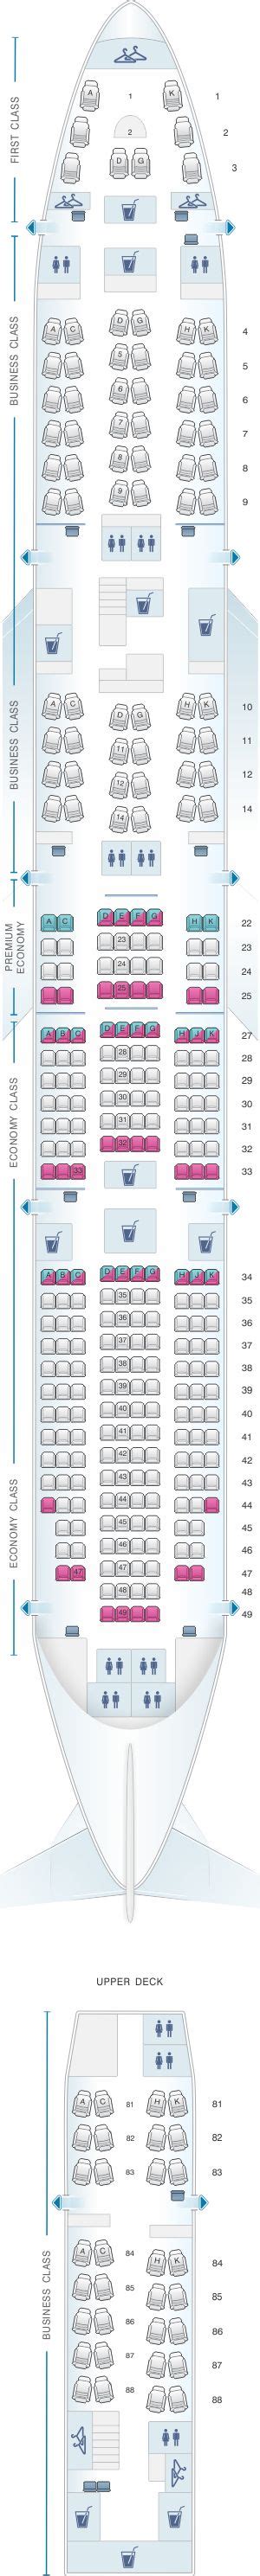 An Airplane Plan Is Shown With All The Seats And Numbers In Each